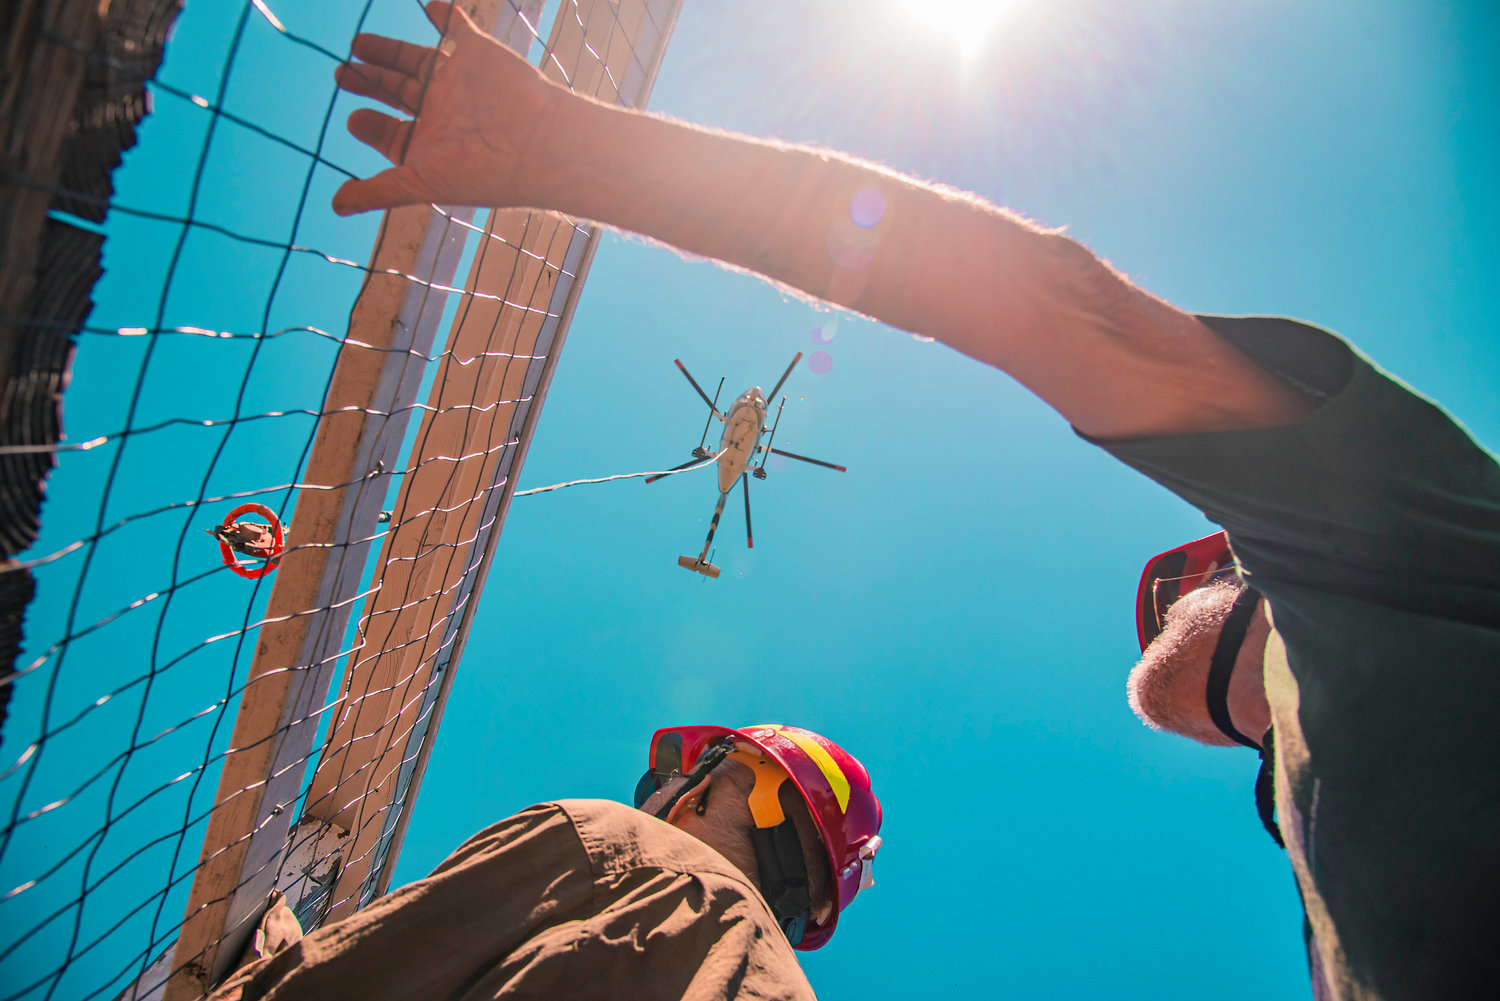 A helicopter lowers a hook over High Rock Lookout as members of the Sand Mountain Society prepare to connect cargo nets full of materials to a cord during a restoration project on Tuesday in the Gifford Pinchot National Forest.